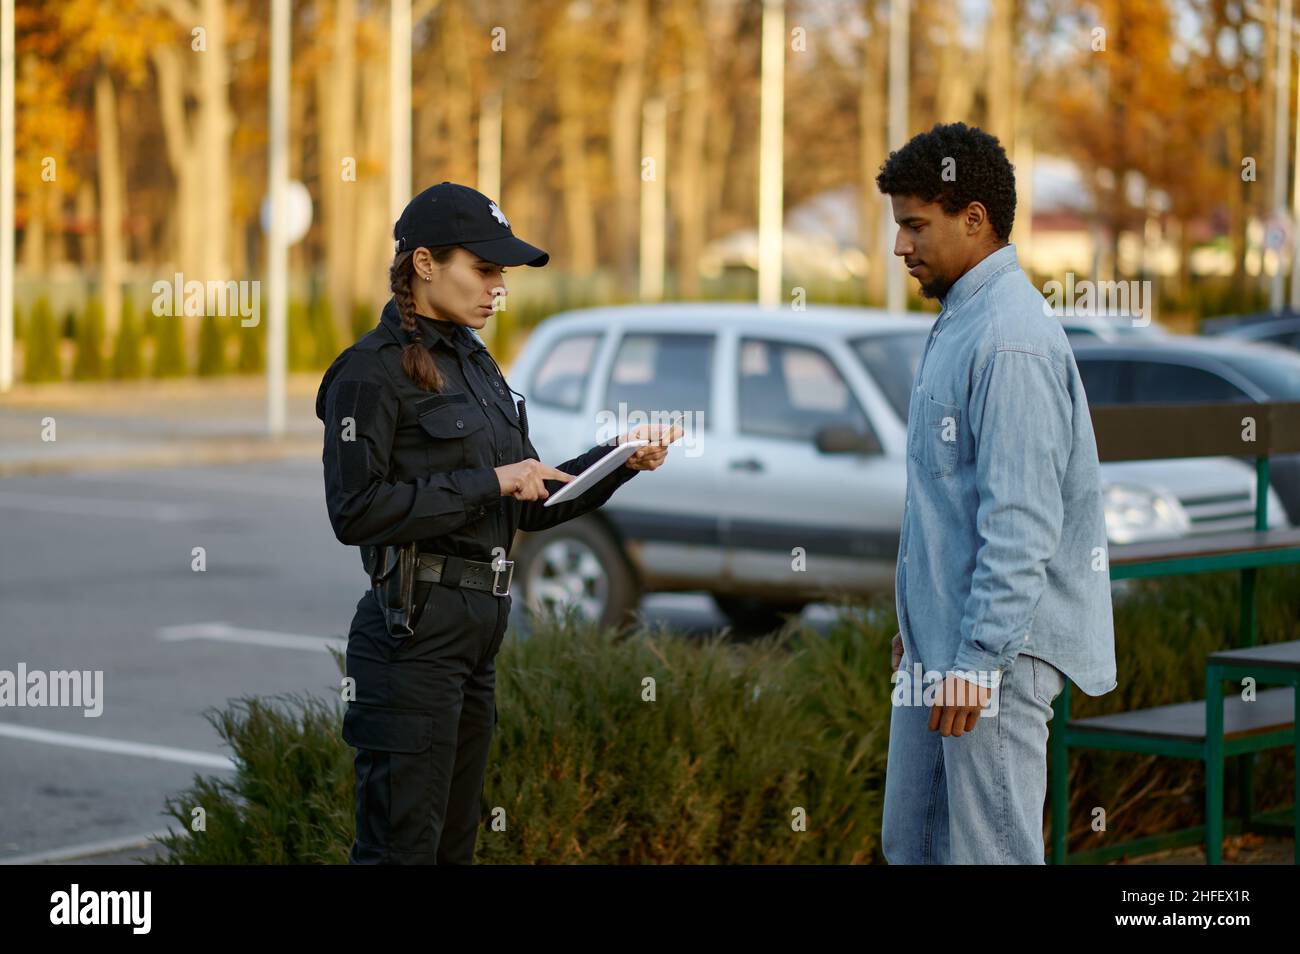 Female cop checking male passerby ID document Stock Photo